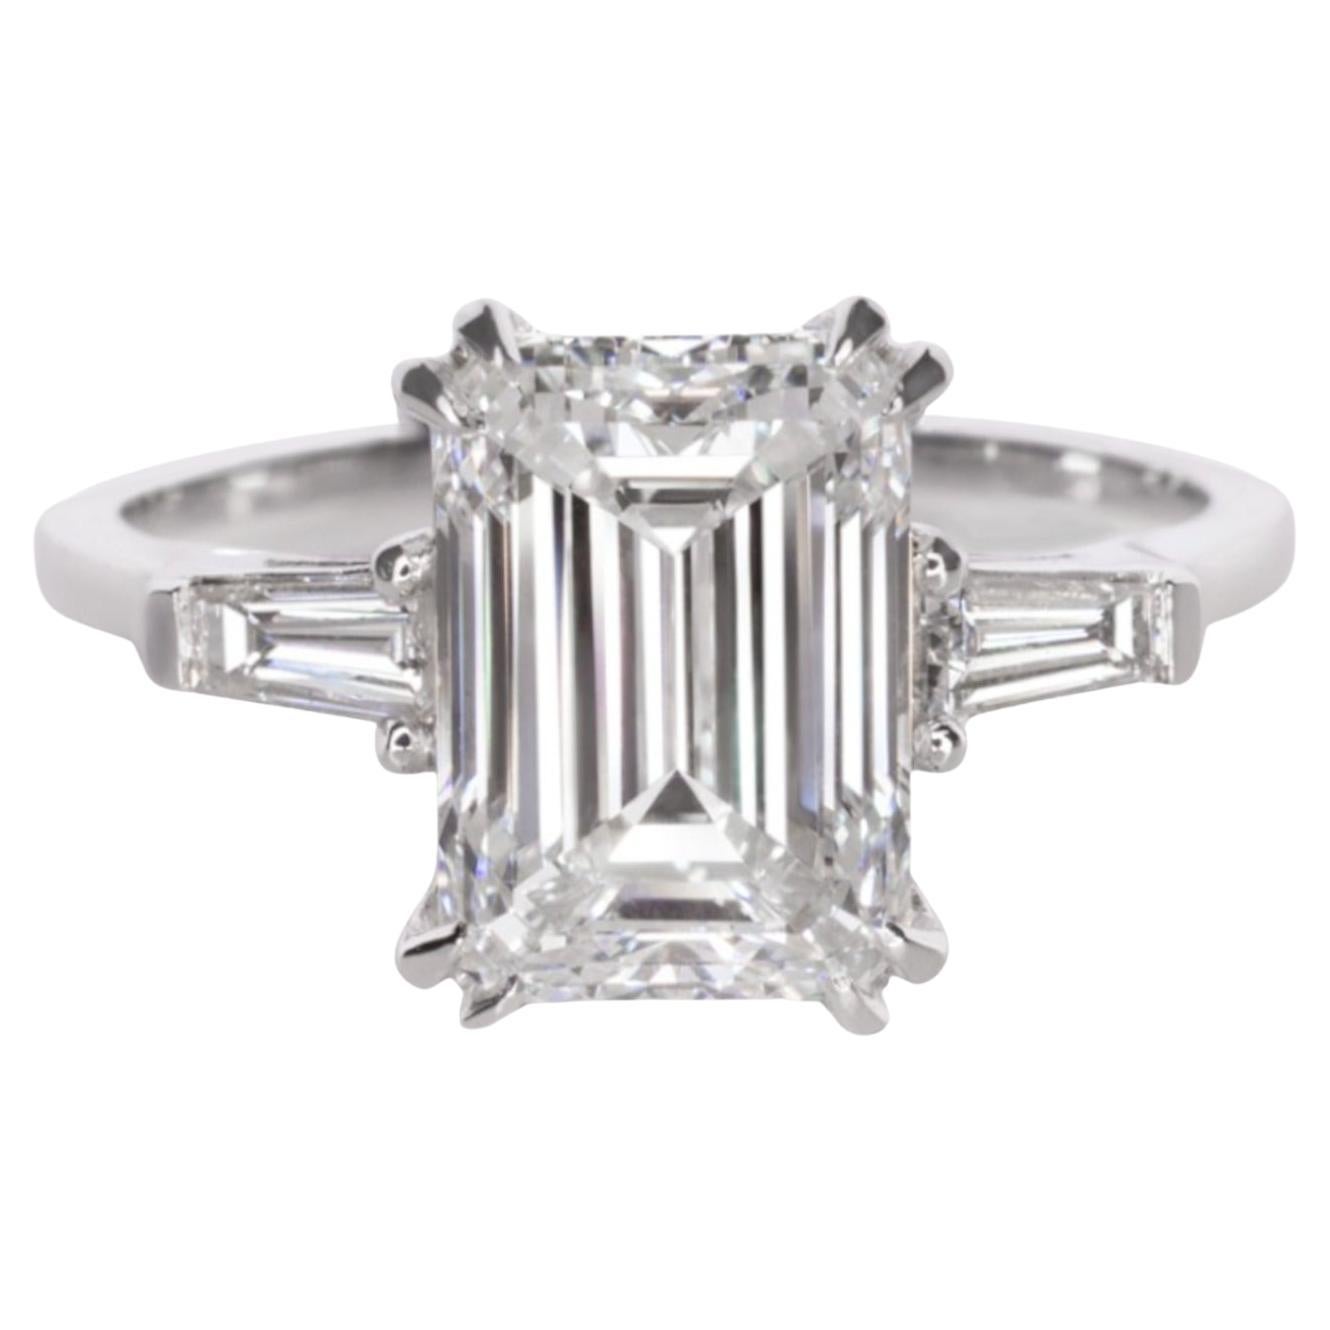 GIA Certified 3 Carat VVS2 Clarity Emerald Cut Diamond Engagement Ring For Sale